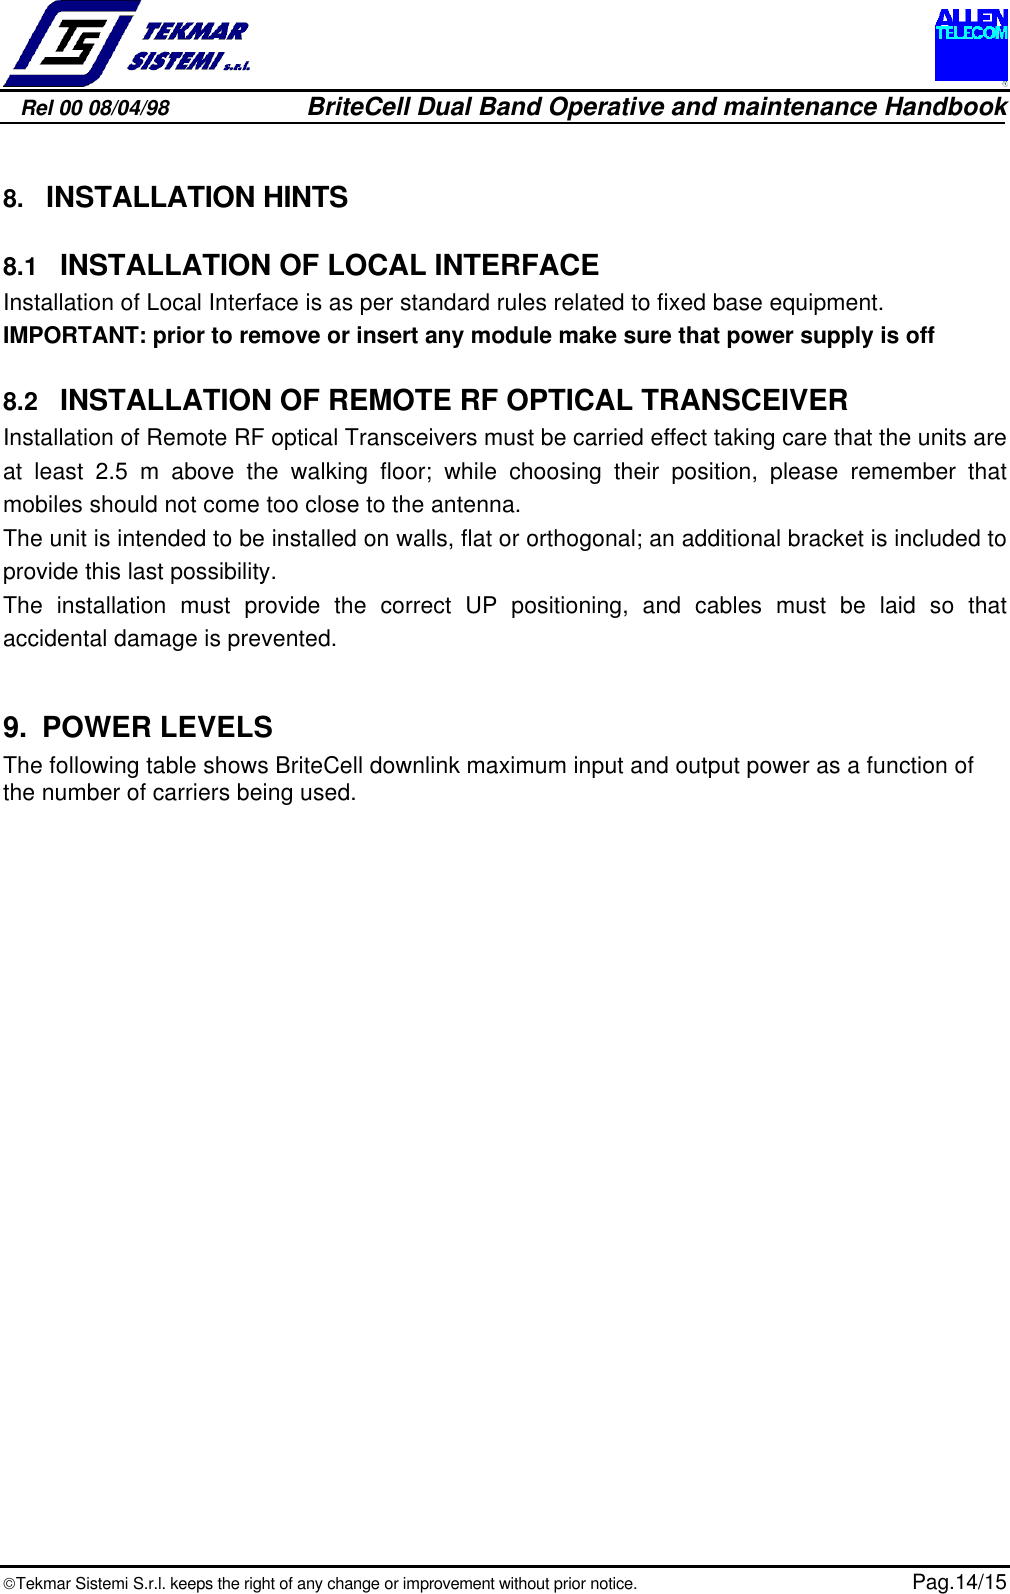 Rel 00 08/04/98                         BriteCell Dual Band Operative and maintenance HandbookTekmar Sistemi S.r.l. keeps the right of any change or improvement without prior notice.  Pag.14/158.  INSTALLATION HINTS8.1  INSTALLATION OF LOCAL INTERFACEInstallation of Local Interface is as per standard rules related to fixed base equipment.IMPORTANT: prior to remove or insert any module make sure that power supply is off8.2  INSTALLATION OF REMOTE RF OPTICAL TRANSCEIVERInstallation of Remote RF optical Transceivers must be carried effect taking care that the units areat least 2.5 m above the walking floor; while choosing their position, please remember thatmobiles should not come too close to the antenna.The unit is intended to be installed on walls, flat or orthogonal; an additional bracket is included toprovide this last possibility.The installation must provide the correct UP positioning, and cables must be laid so thataccidental damage is prevented.9. POWER LEVELSThe following table shows BriteCell downlink maximum input and output power as a function ofthe number of carriers being used.